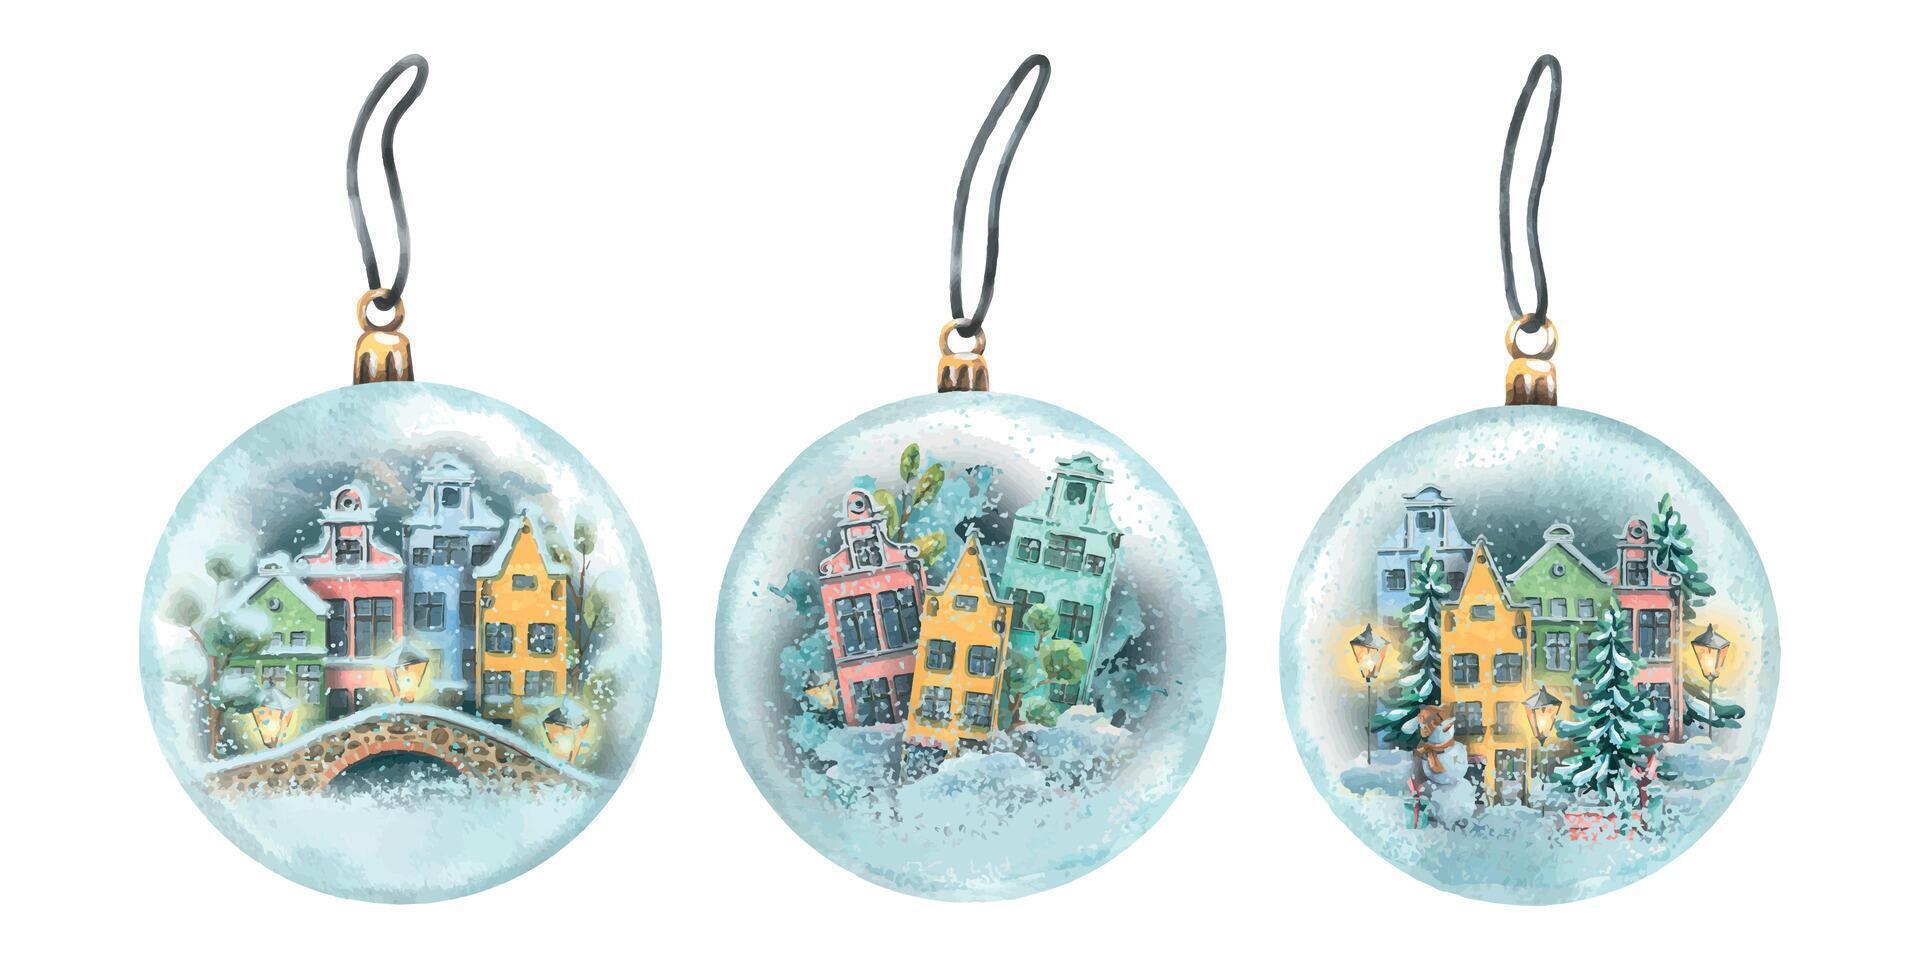 Glass Christmas balls, transparent with cute houses inside and snow. Watercolor illustration. Three isolated toys on a white background. For the decoration and design of the new year and winter. vector